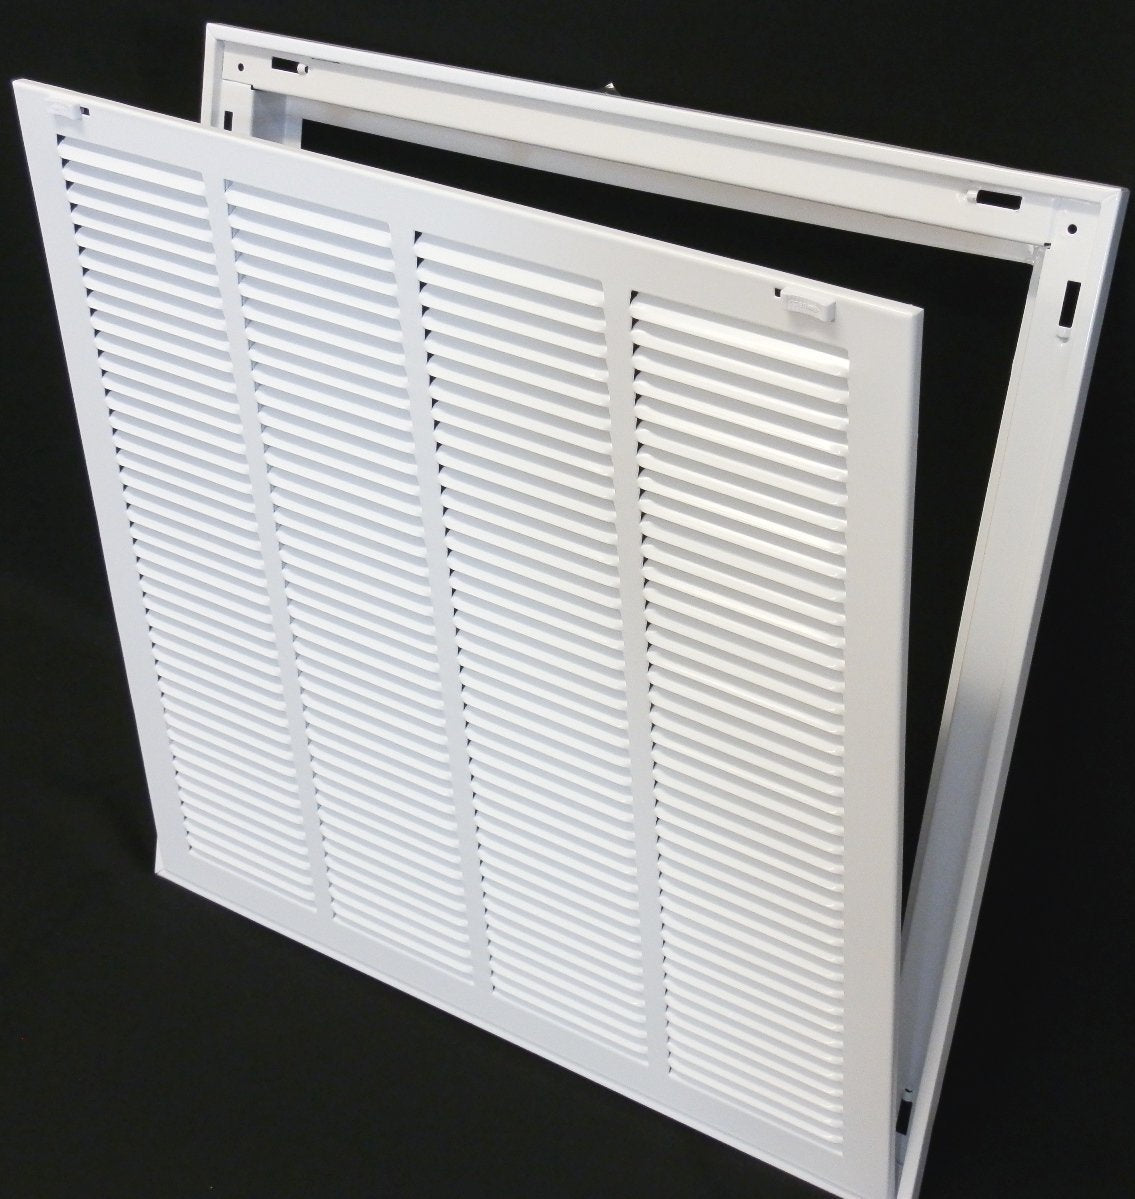 12&quot; X 28&quot; Steel Return Air Filter Grille for 1&quot; Filter - Removable Frame - [Outer Dimensions: 14 5/8&quot; X 30 5/8&quot;]